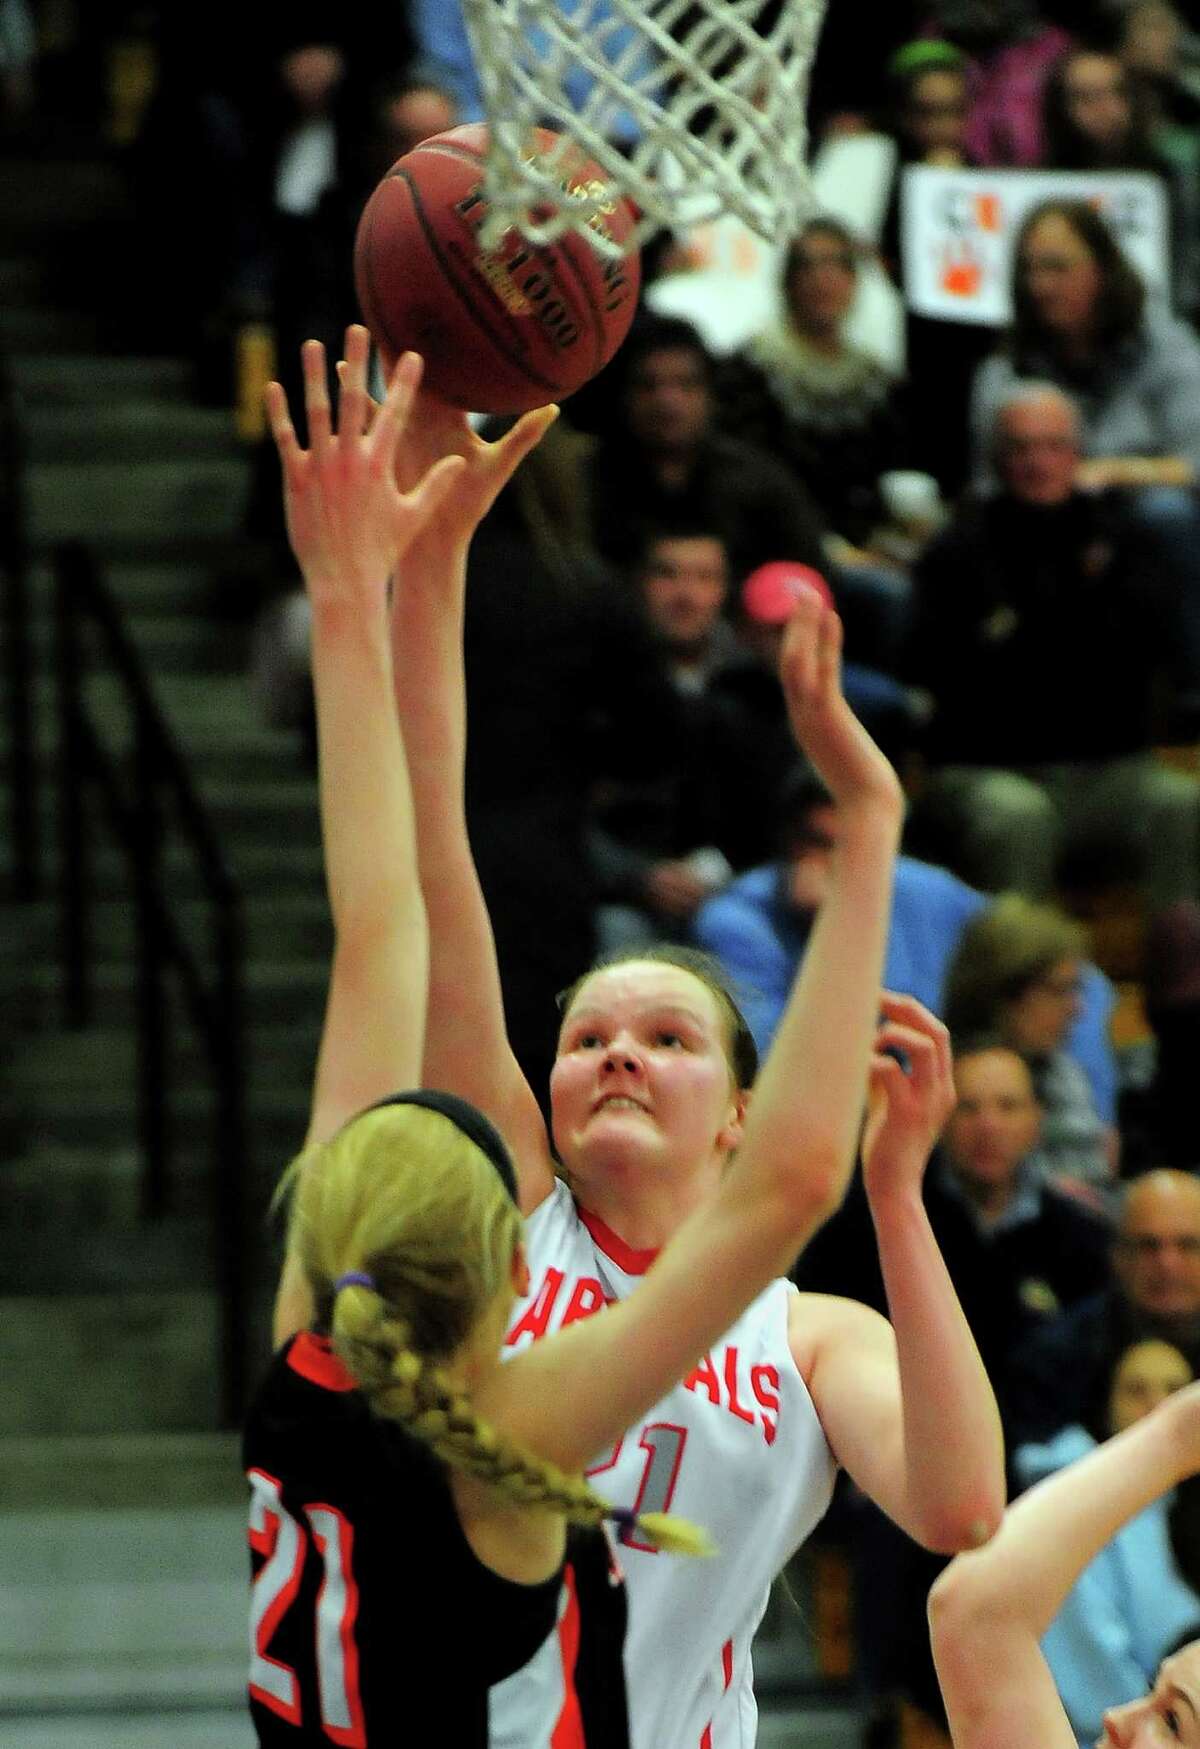 Greenwich's Abbie Wolf looks for two as Ridgefield's Rebecca Lawrence defends, during FCIAC Girls' Basketball Championship action in Fairfield, Conn. on Thursday Feb. 26, 2015.